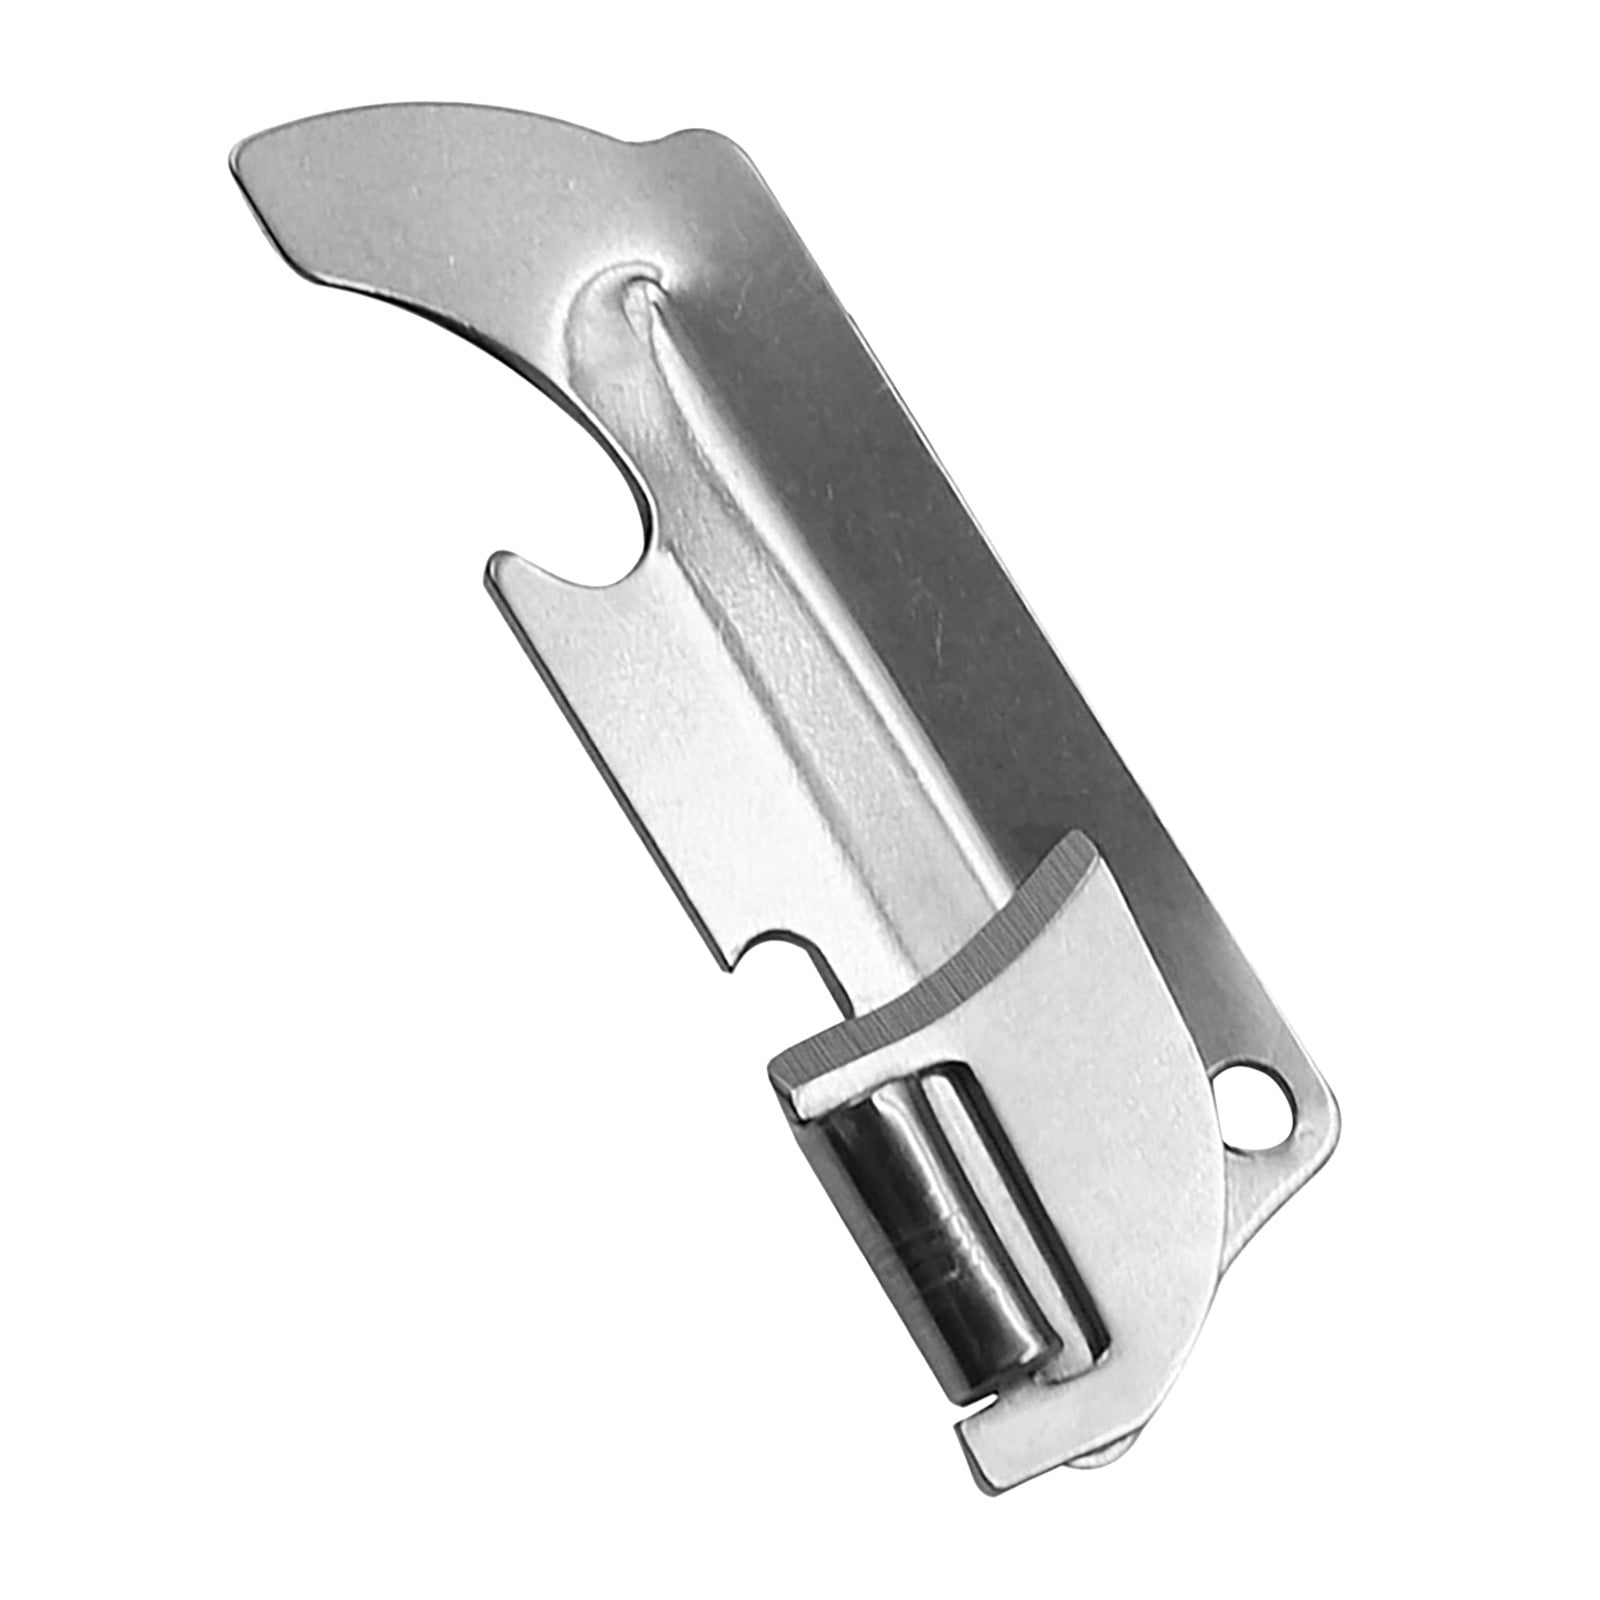  Stainless Steel Multipurpose Can Opener Folding Mini Portable Can  Opener Gadget (Multicolor, One Size) : Home & Kitchen